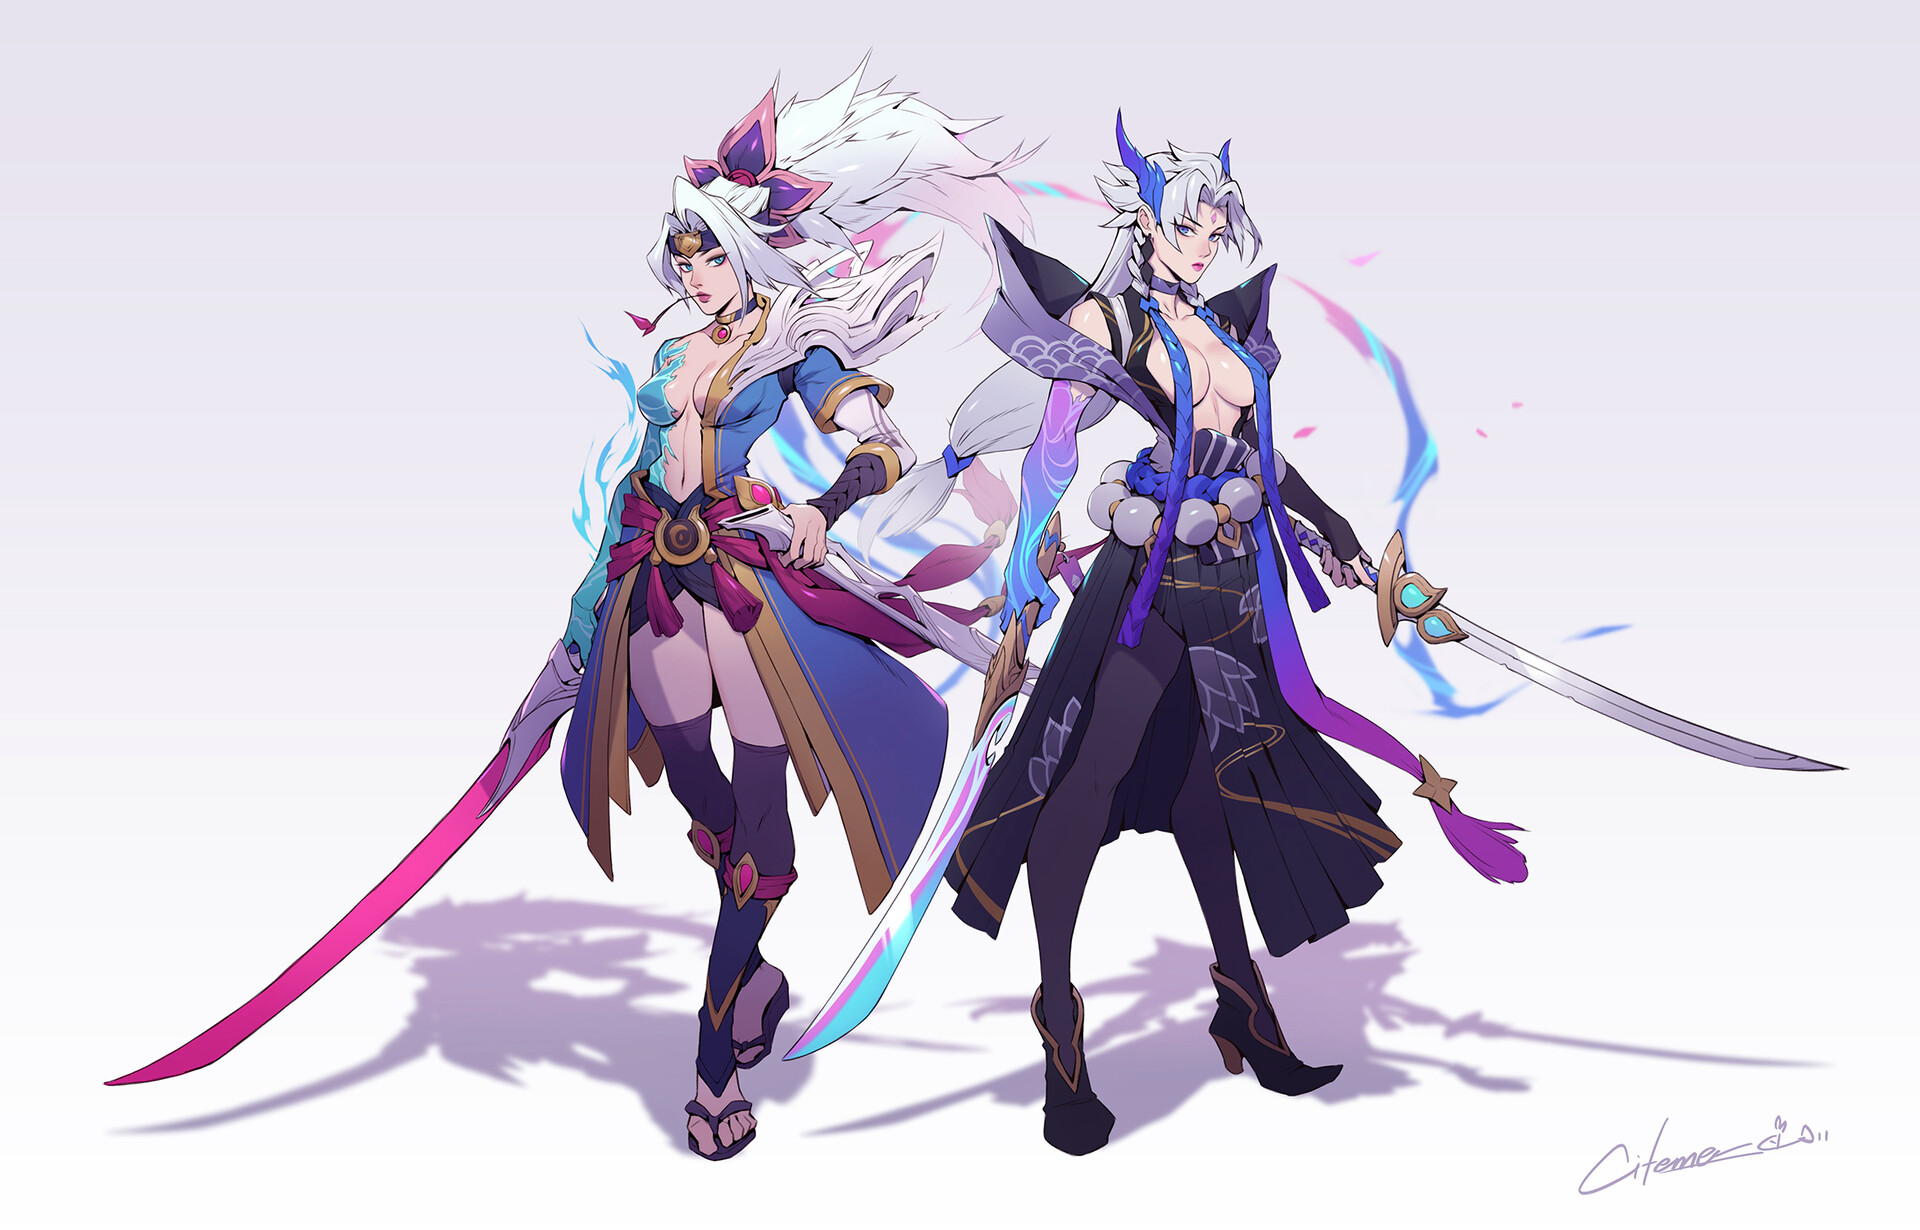 General 1920x1230 Citemer Liu drawing women genderswap League of Legends Yasuo (League of Legends) spirit blossom skimpy clothes topless strategic covering hair over nipples dress fantasy art magician silver hair Yone (League of Legends)